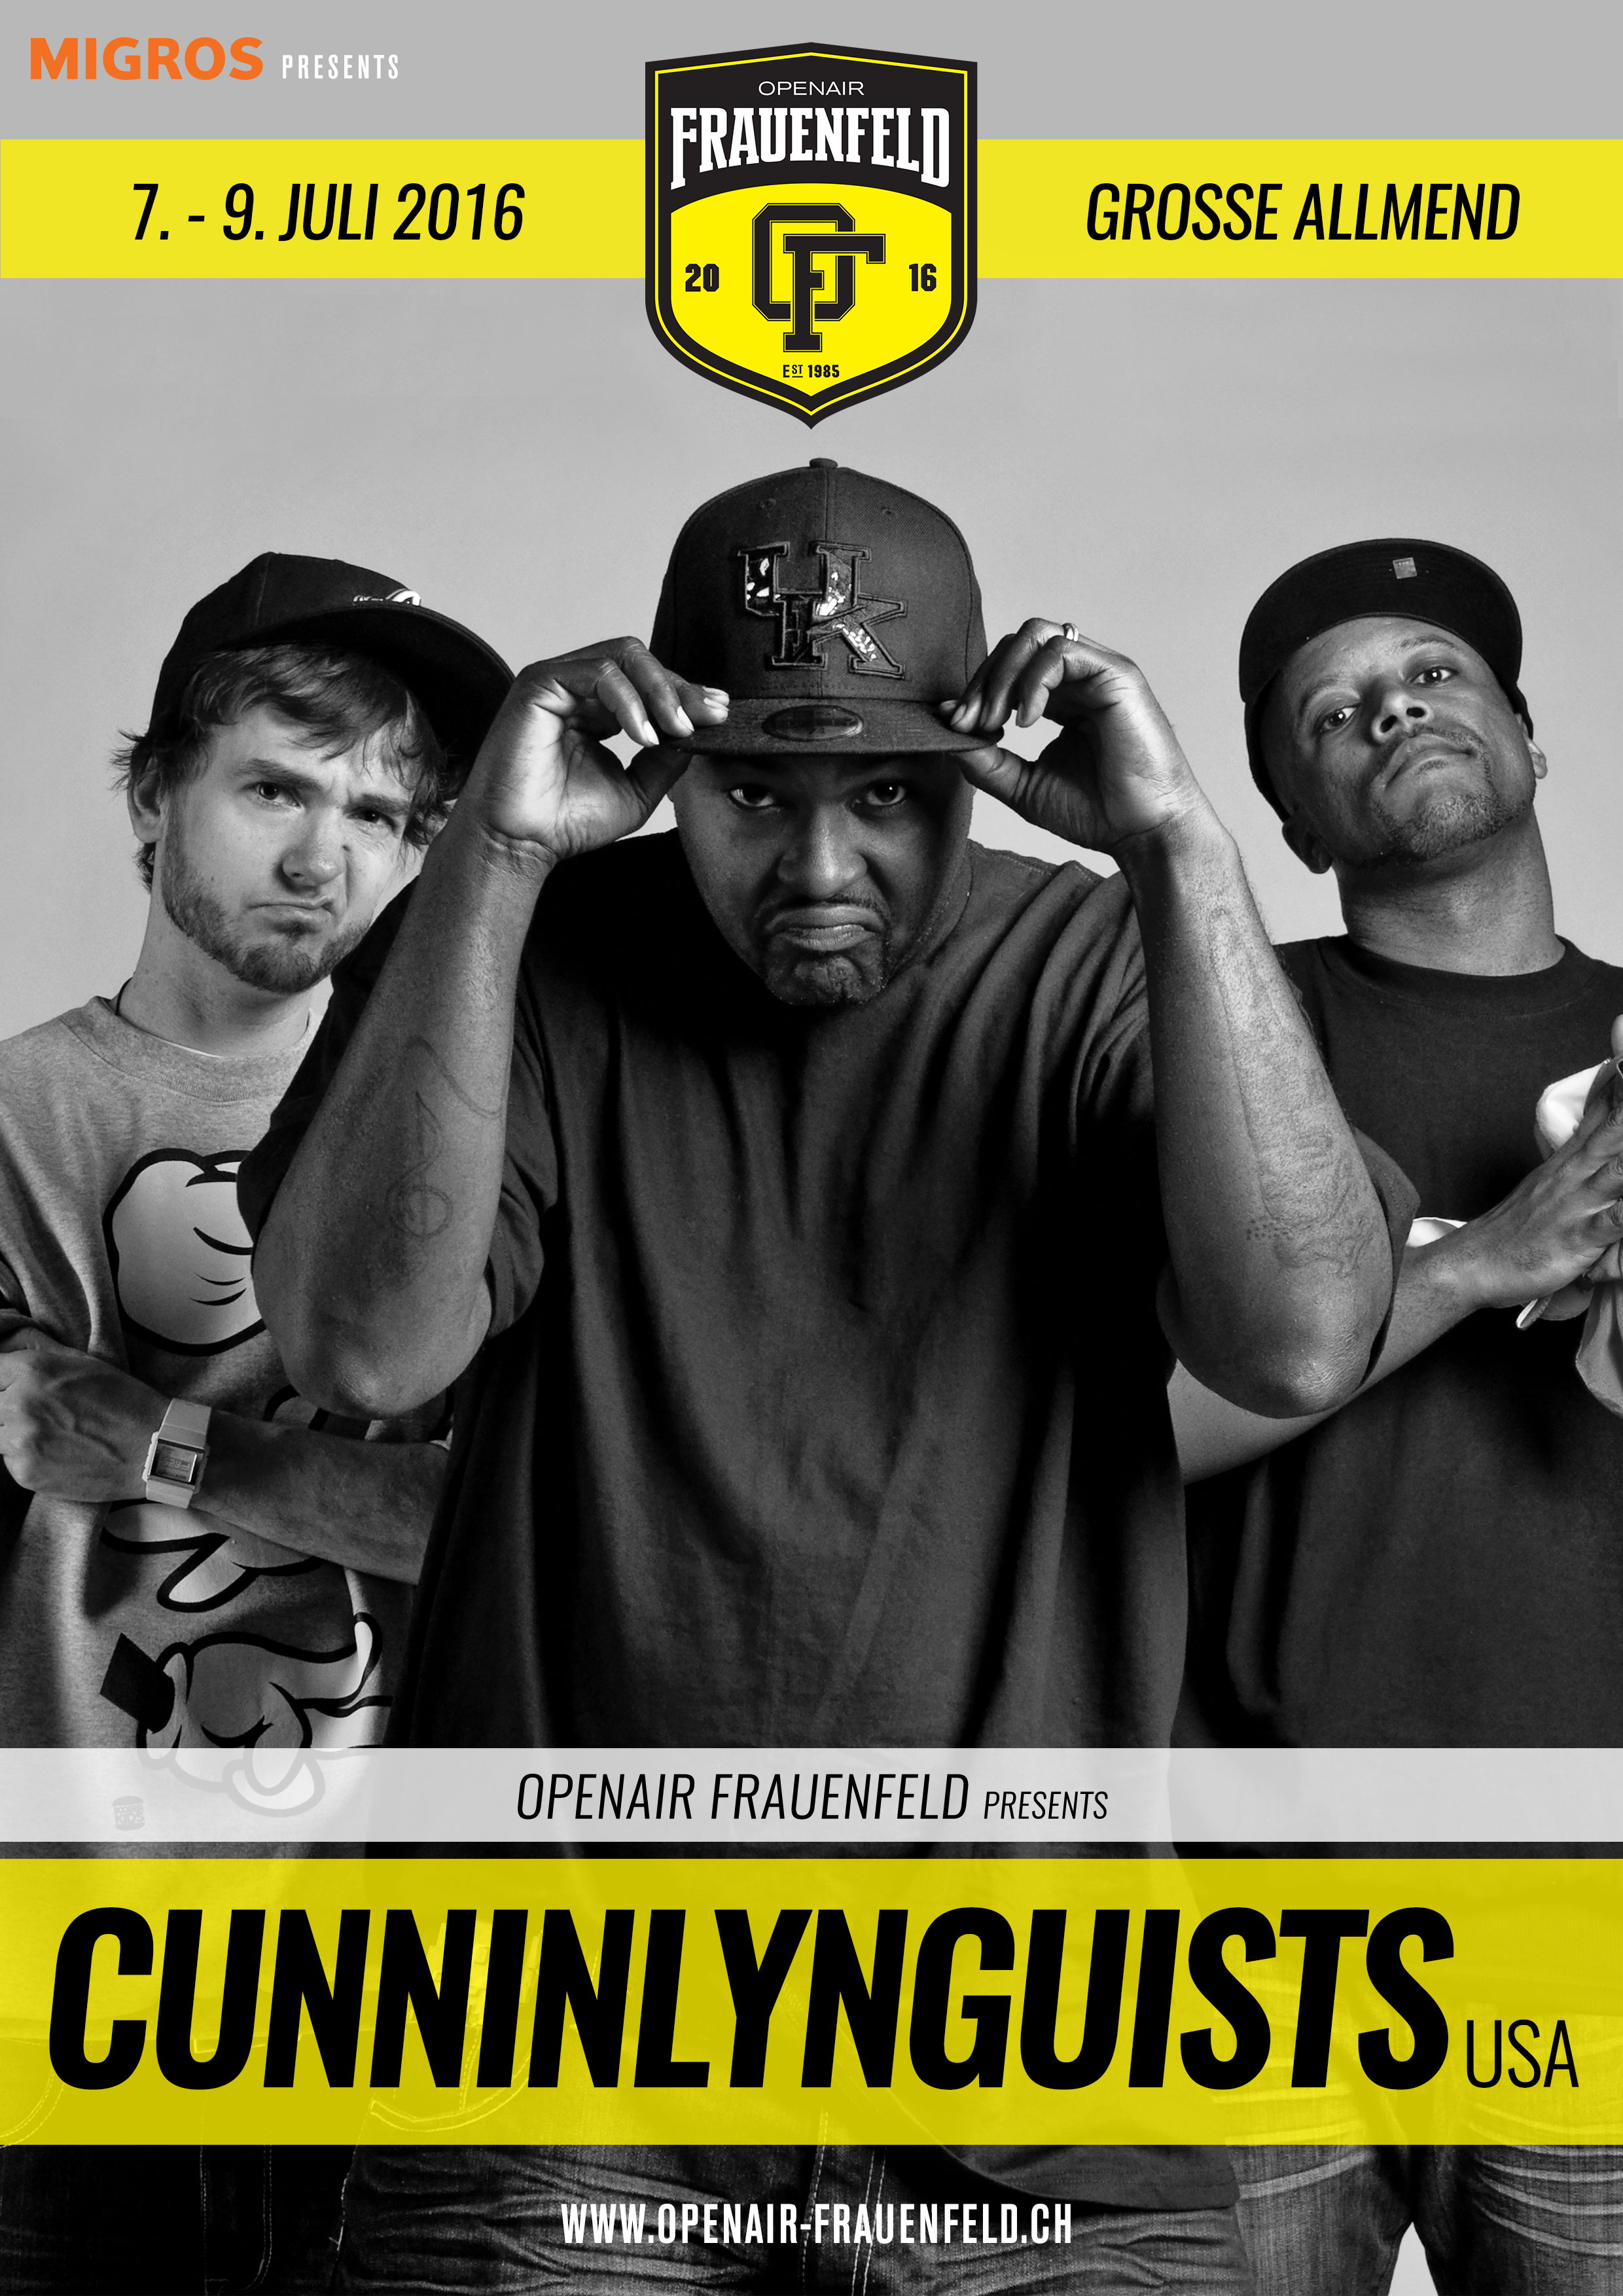 CunninLynguists to Openair Frauenfeld - Bad Taste Empire